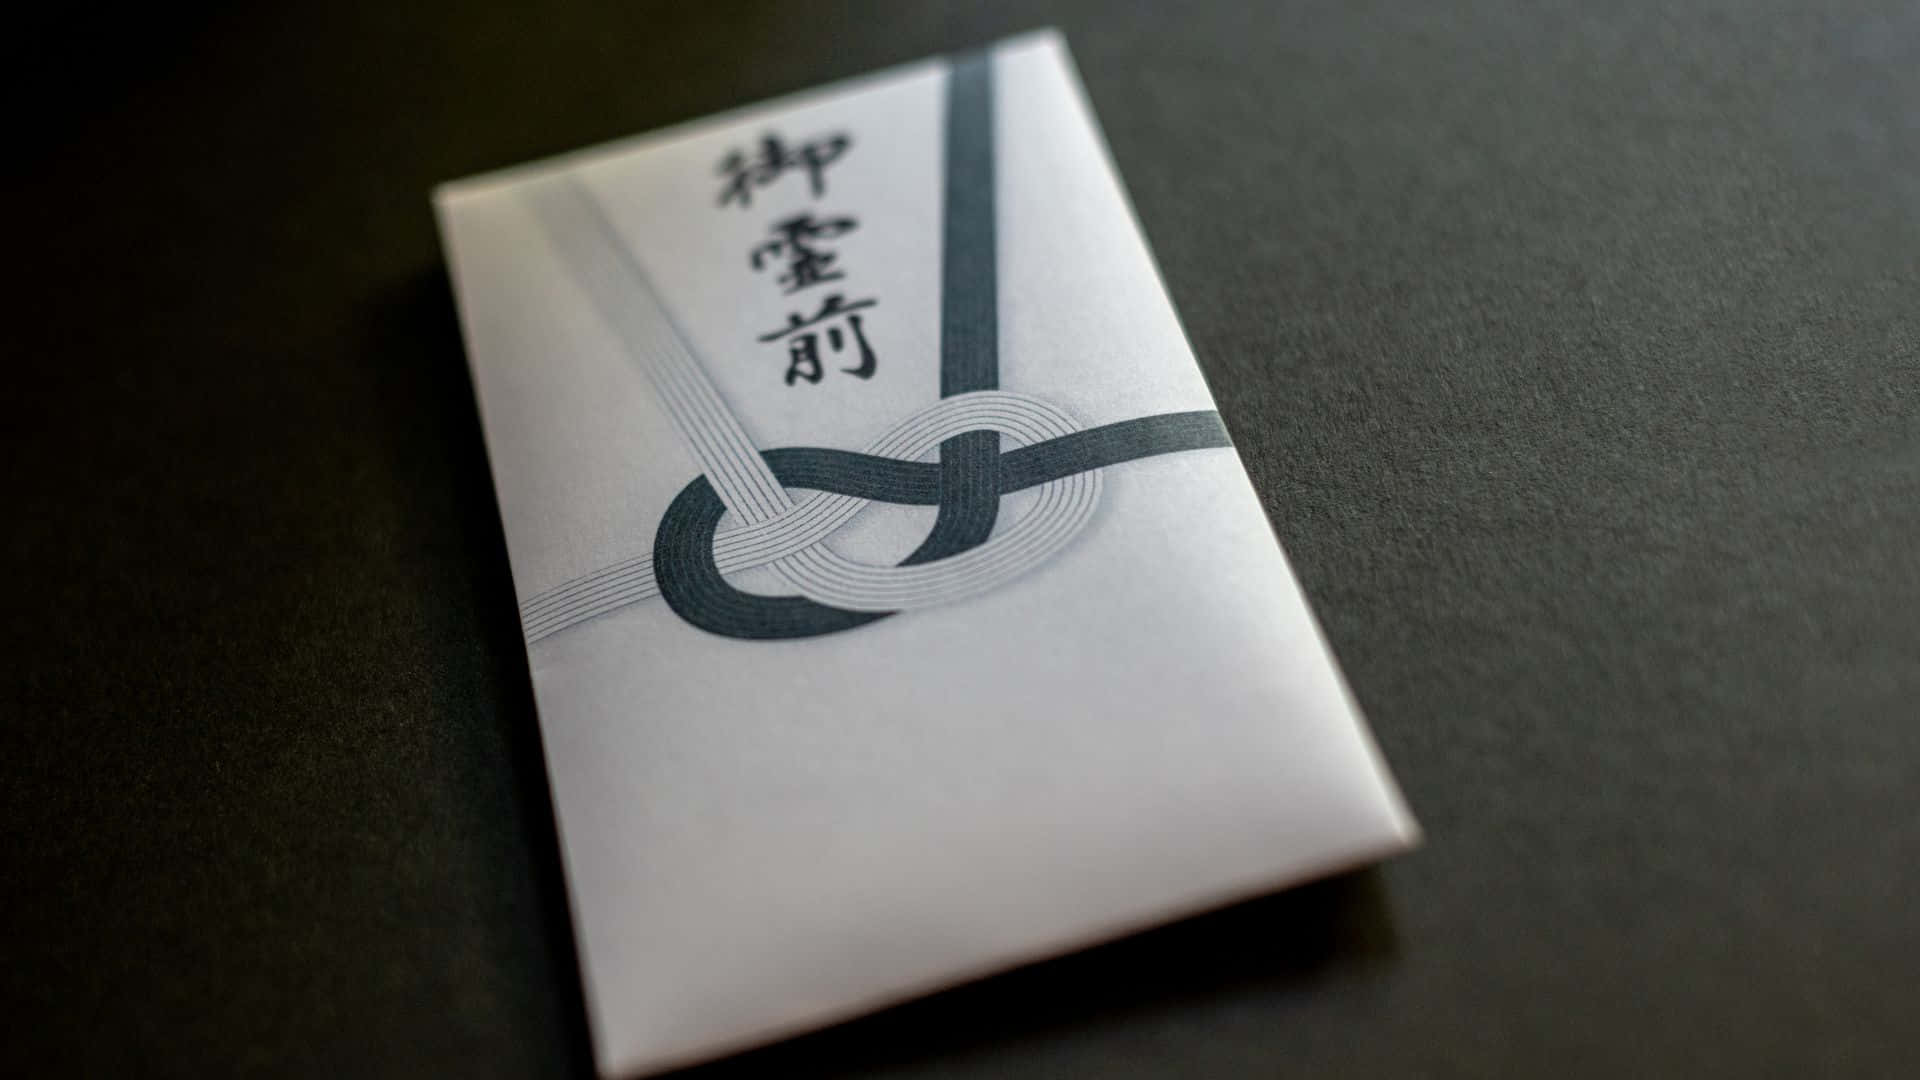 A Small Envelope With A Japanese Design On It